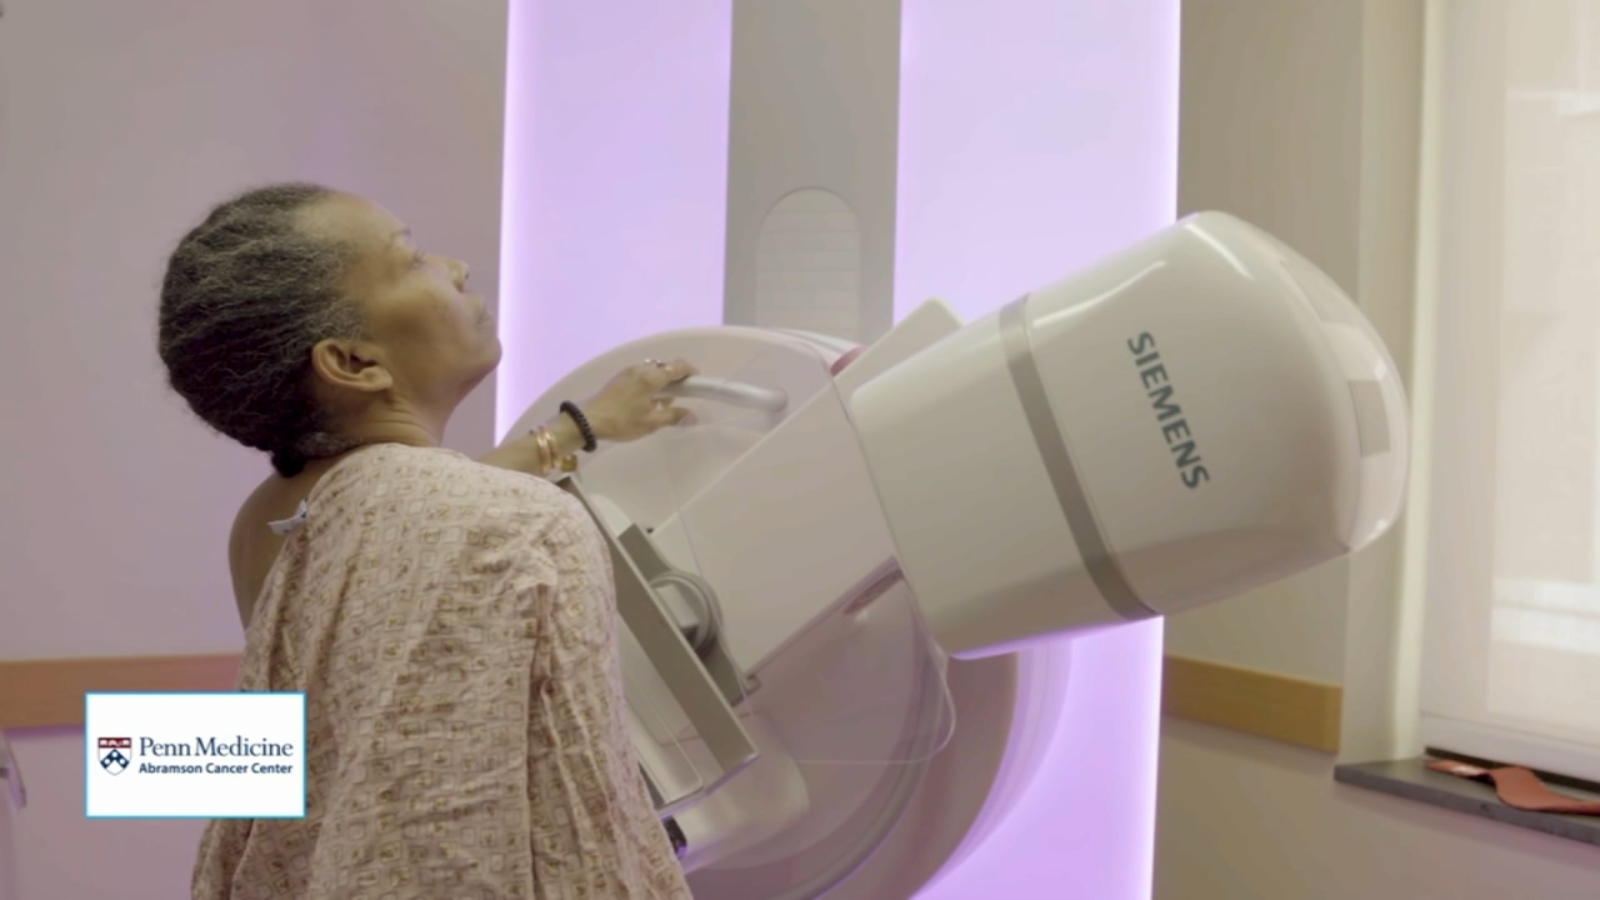 Breast Cancer screening guidelines | Early detection, recommendations and how Penn medicine’s program is helping women [Video]